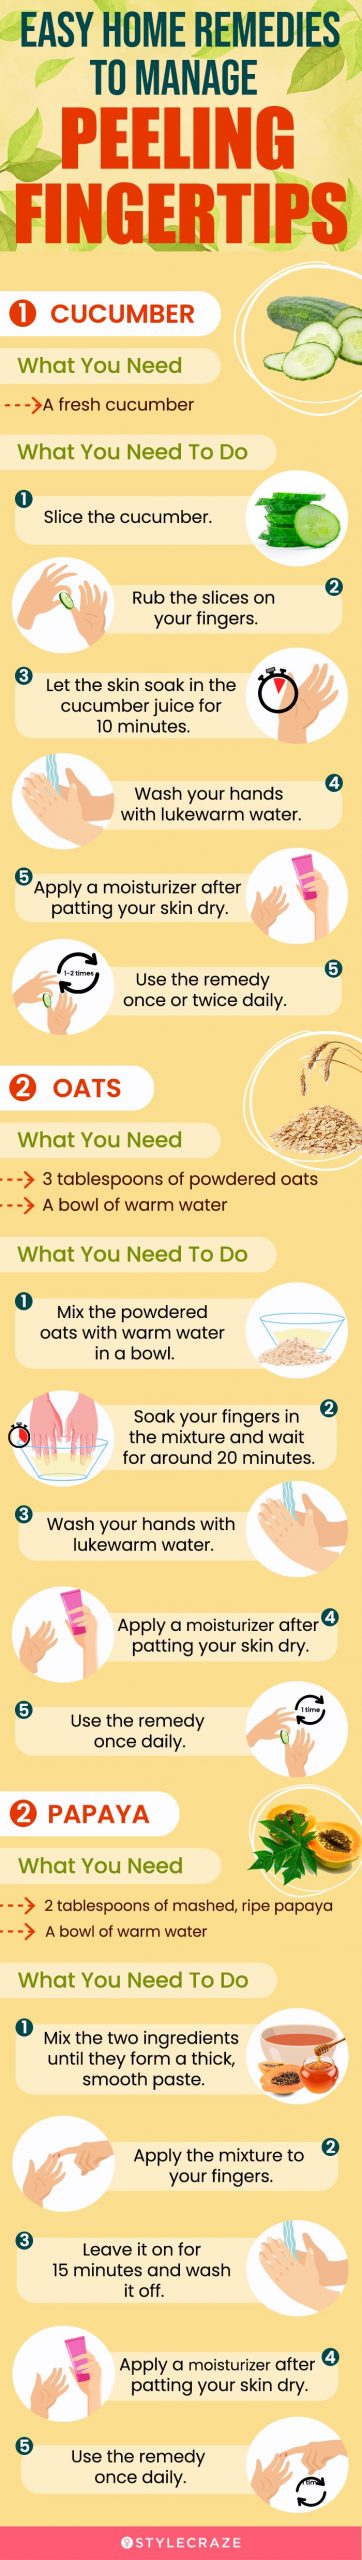 easy home remedies to manage peeling fingertips (infographic)